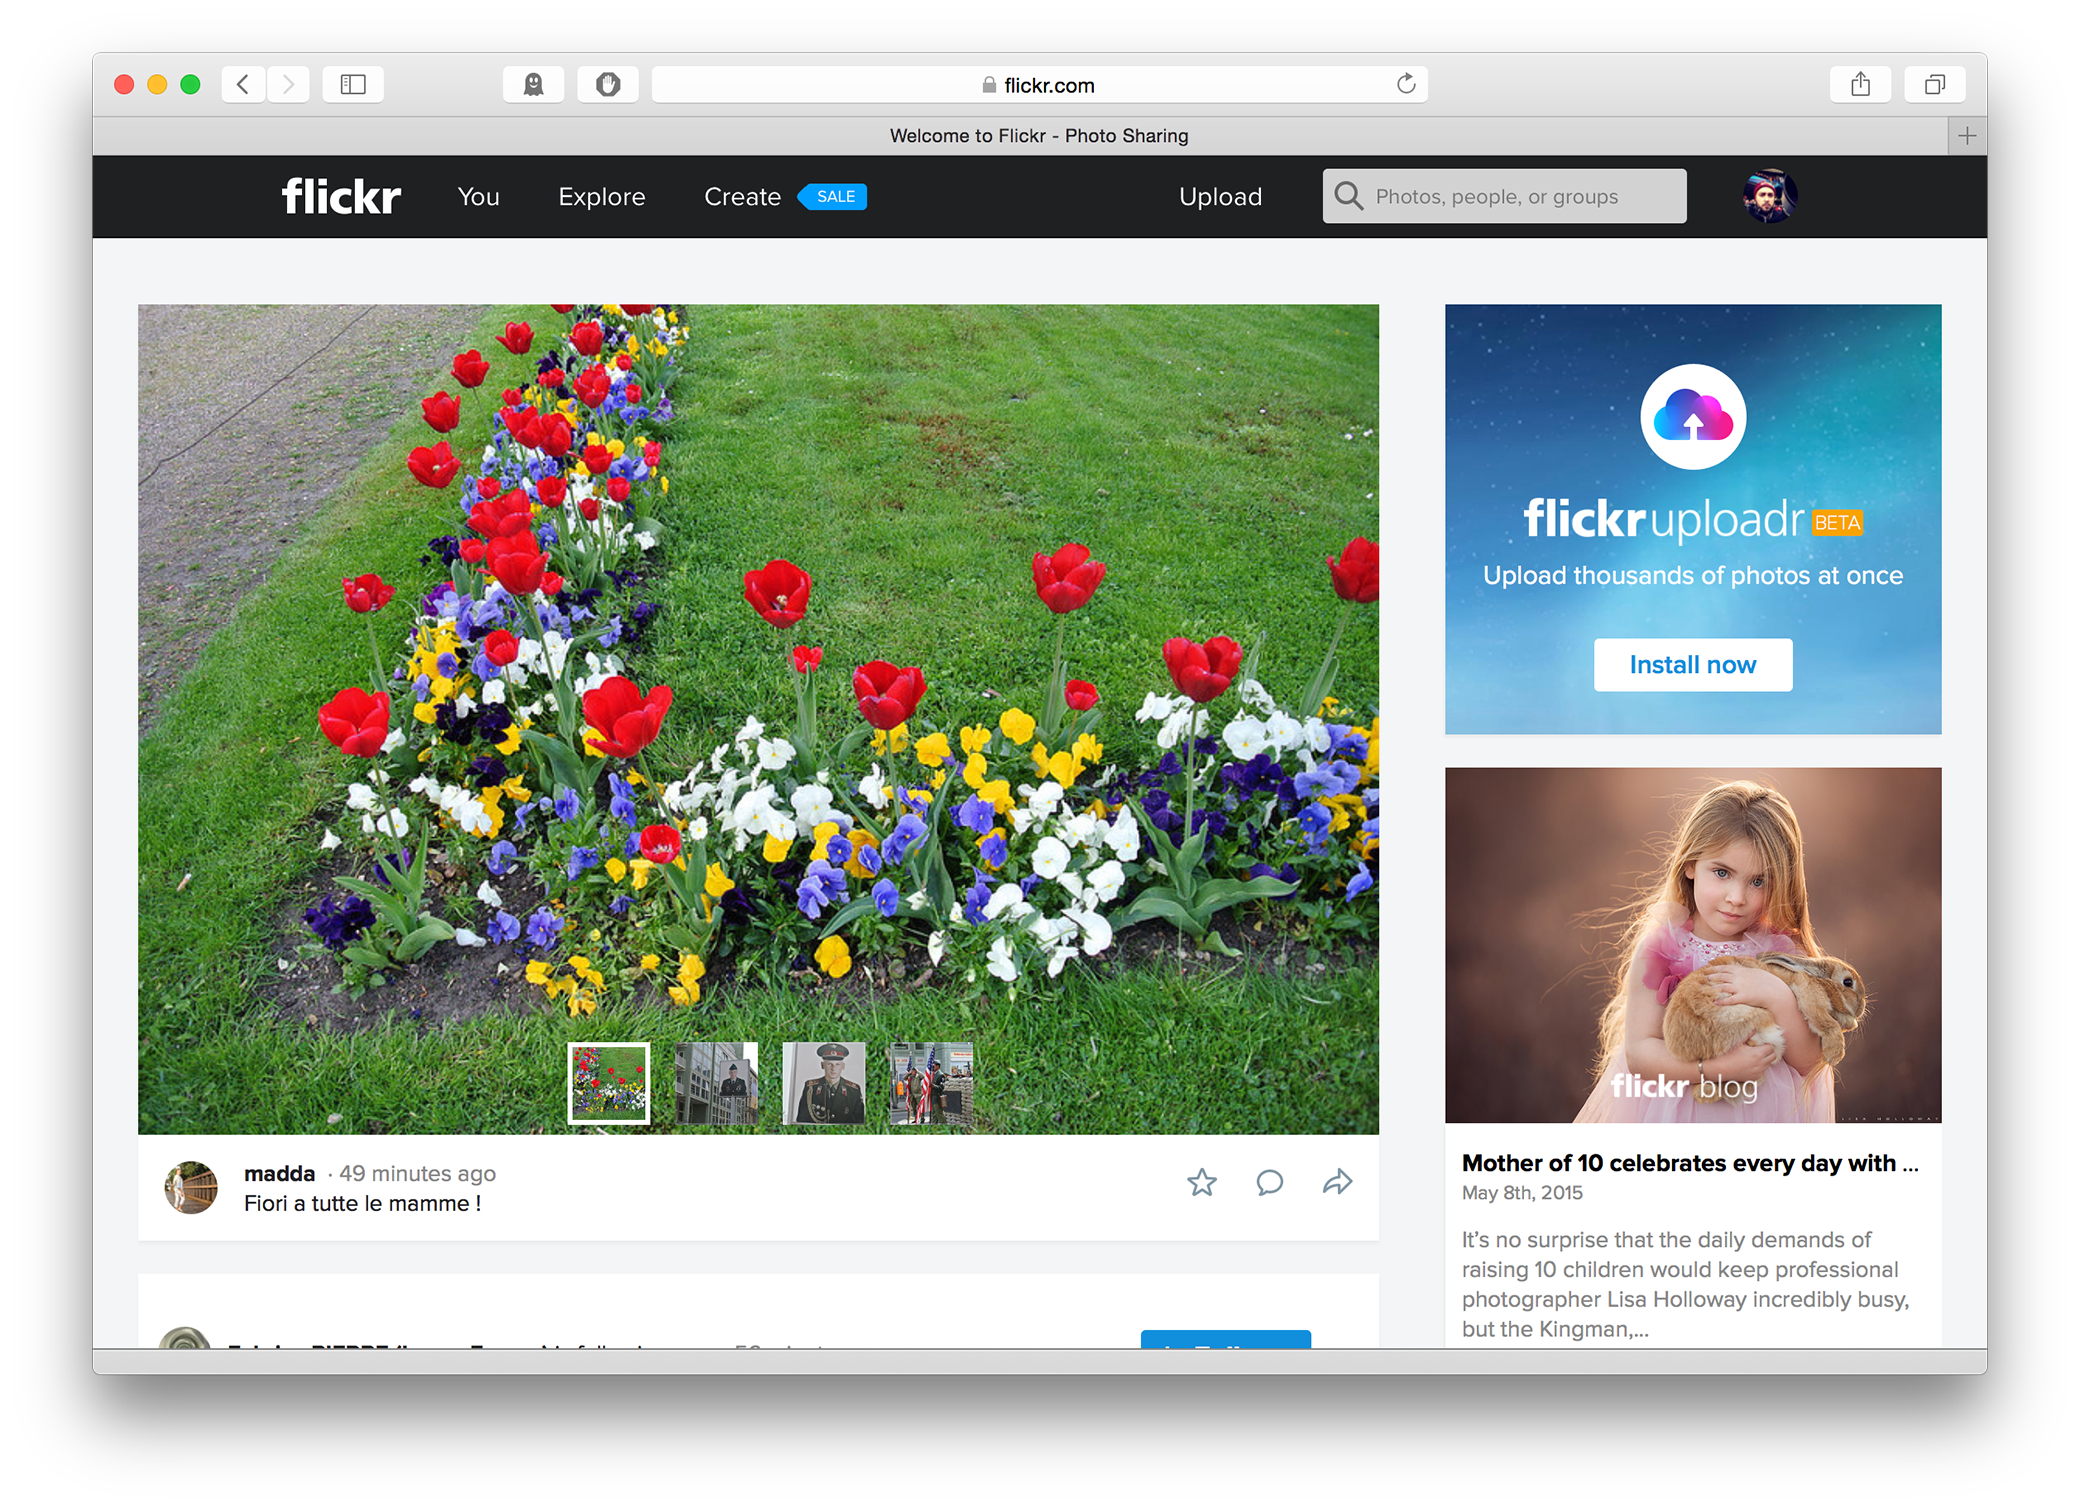 Flickr 4.0 - Main Page